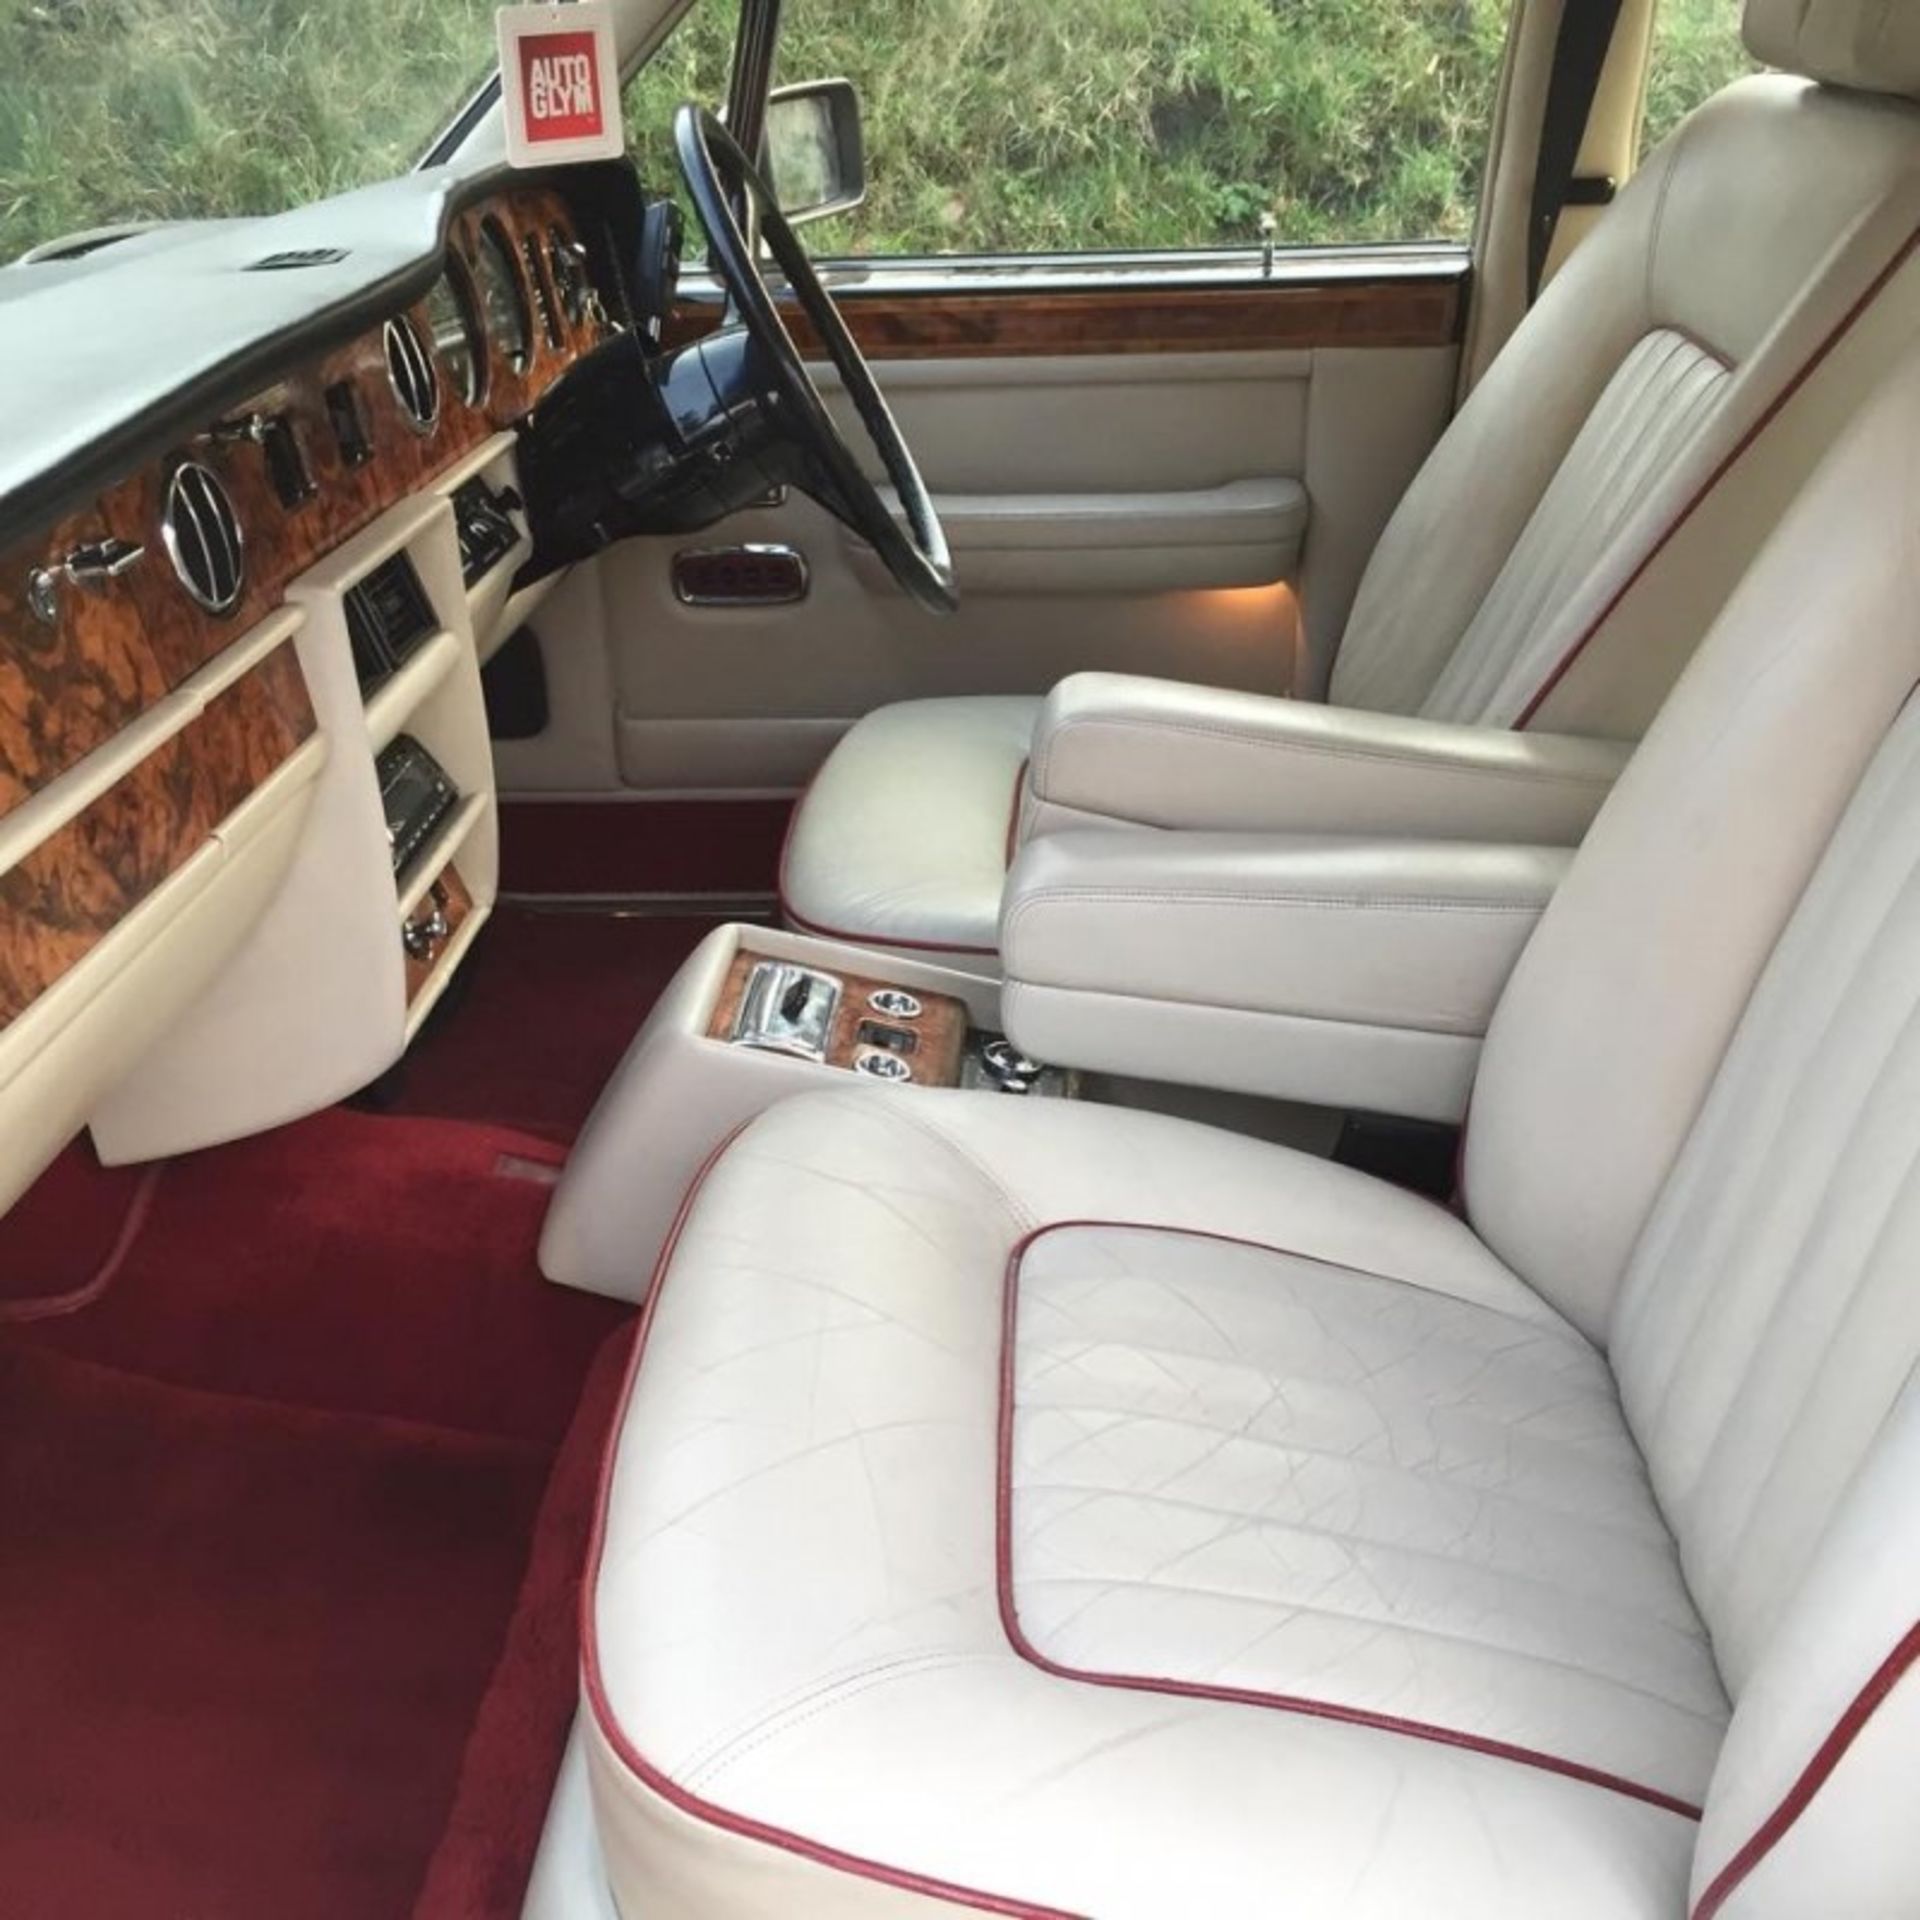 Rolls Royce Silver Spur 1986 - Image 3 of 4